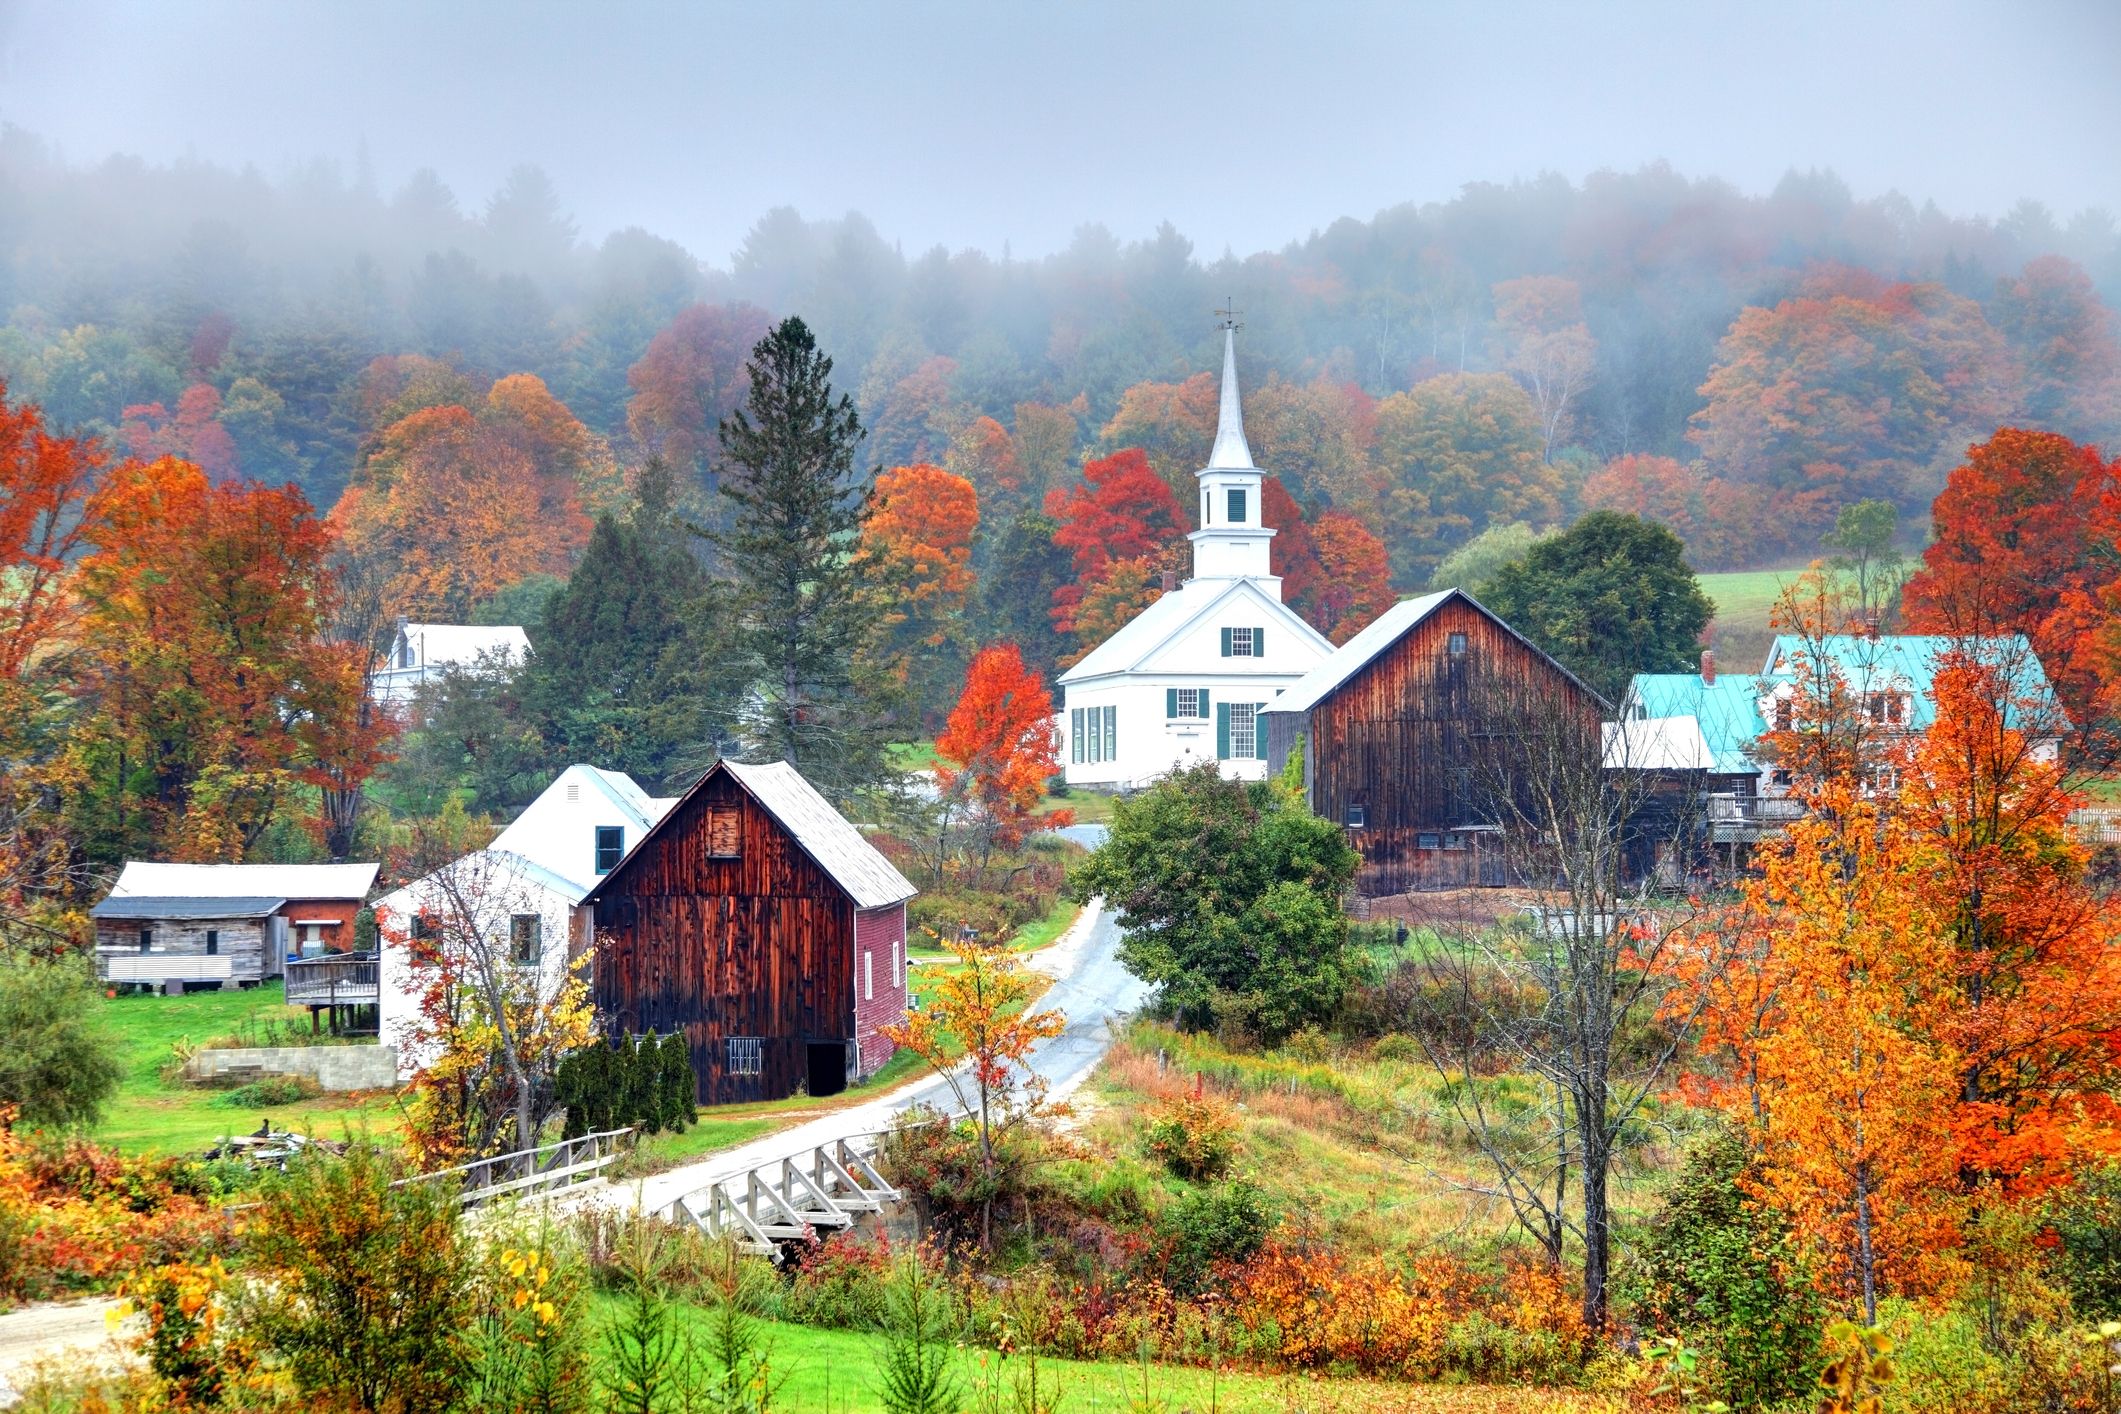 The Most Beautiful Places In the World To See Fall Foliage